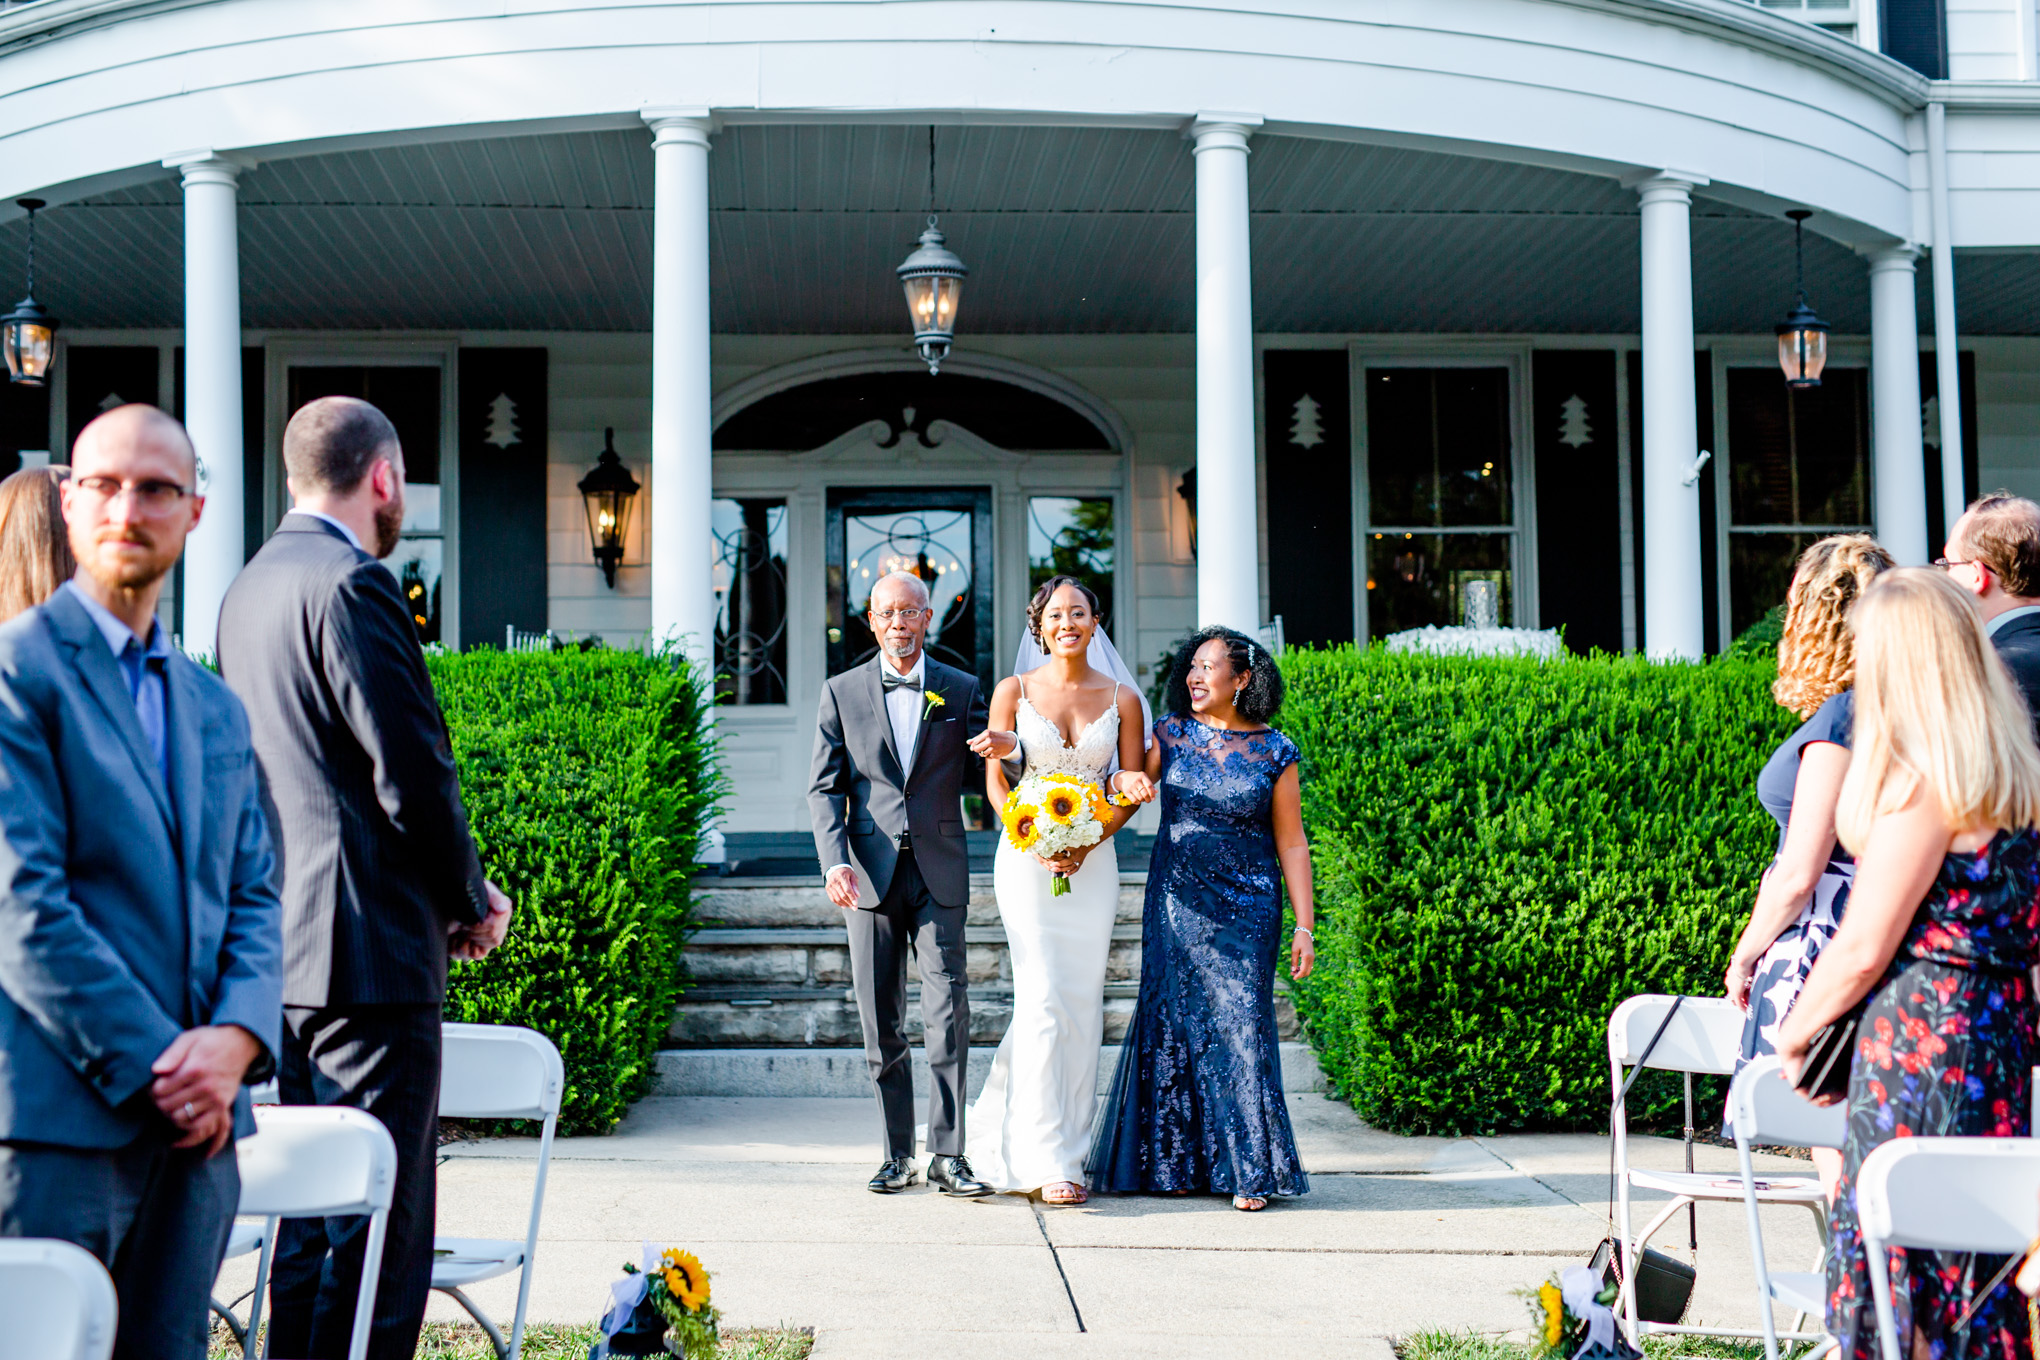 summer mansion at valley country club wedding, Maryland wedding, MD wedding, Maryland wedding photographer, summer wedding, summer wedding inspiration, Baltimore wedding photographer, DC wedding photographer, country club wedding, yellow aesthetic, Rachel E.H. Photography, wedding processional